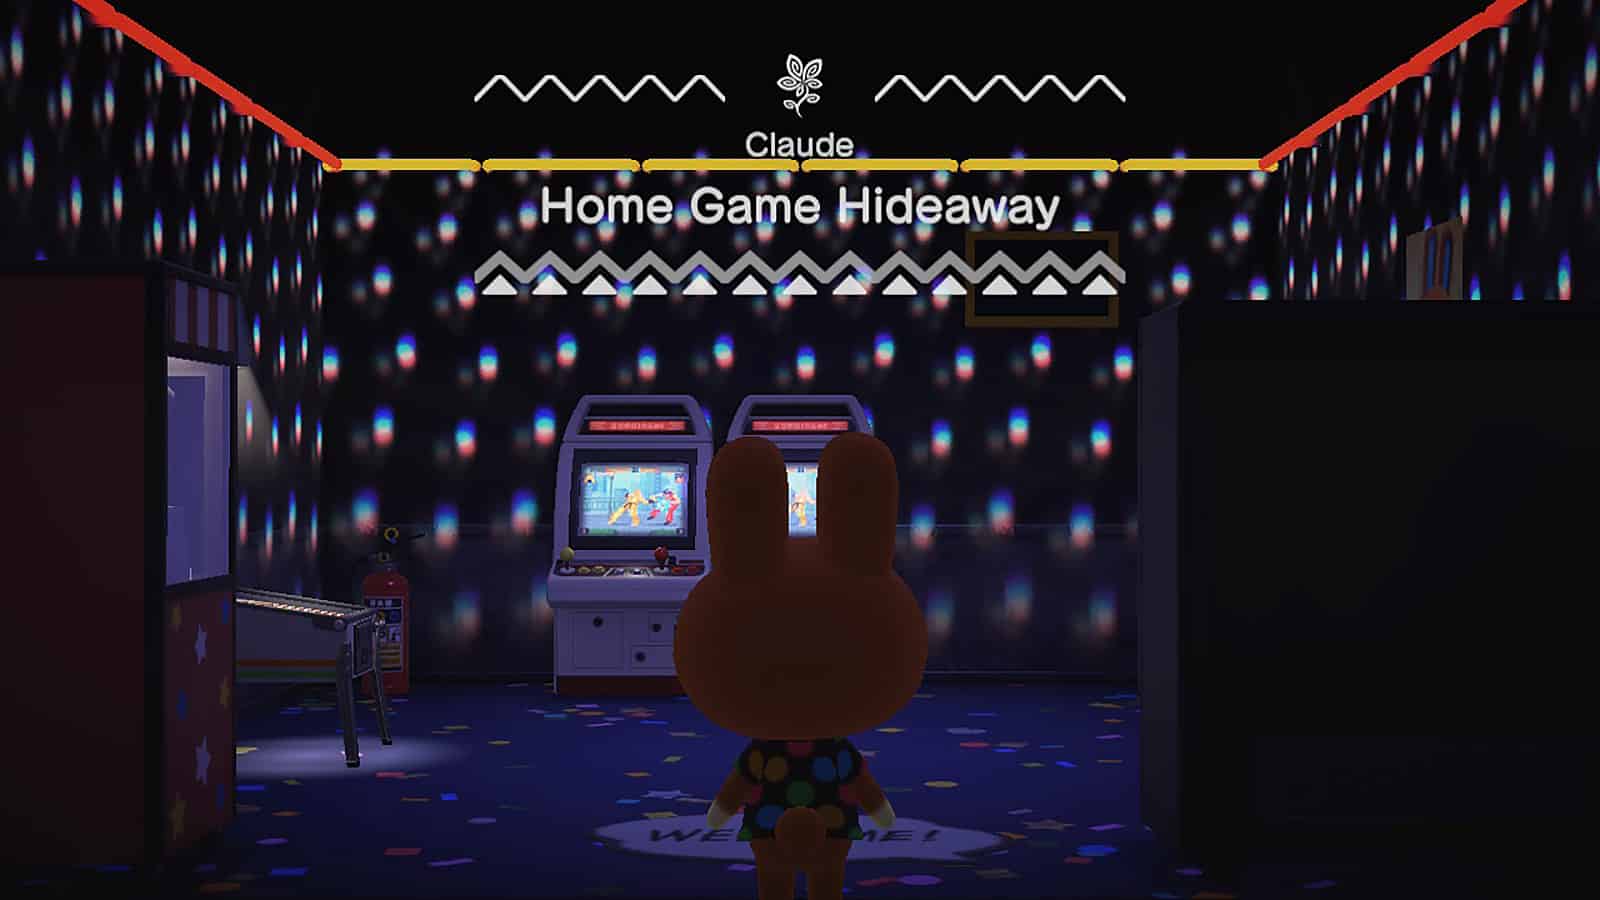 Claude's Home Game Hideaway room in Animal Crossing's Happy Home Paradise DLC